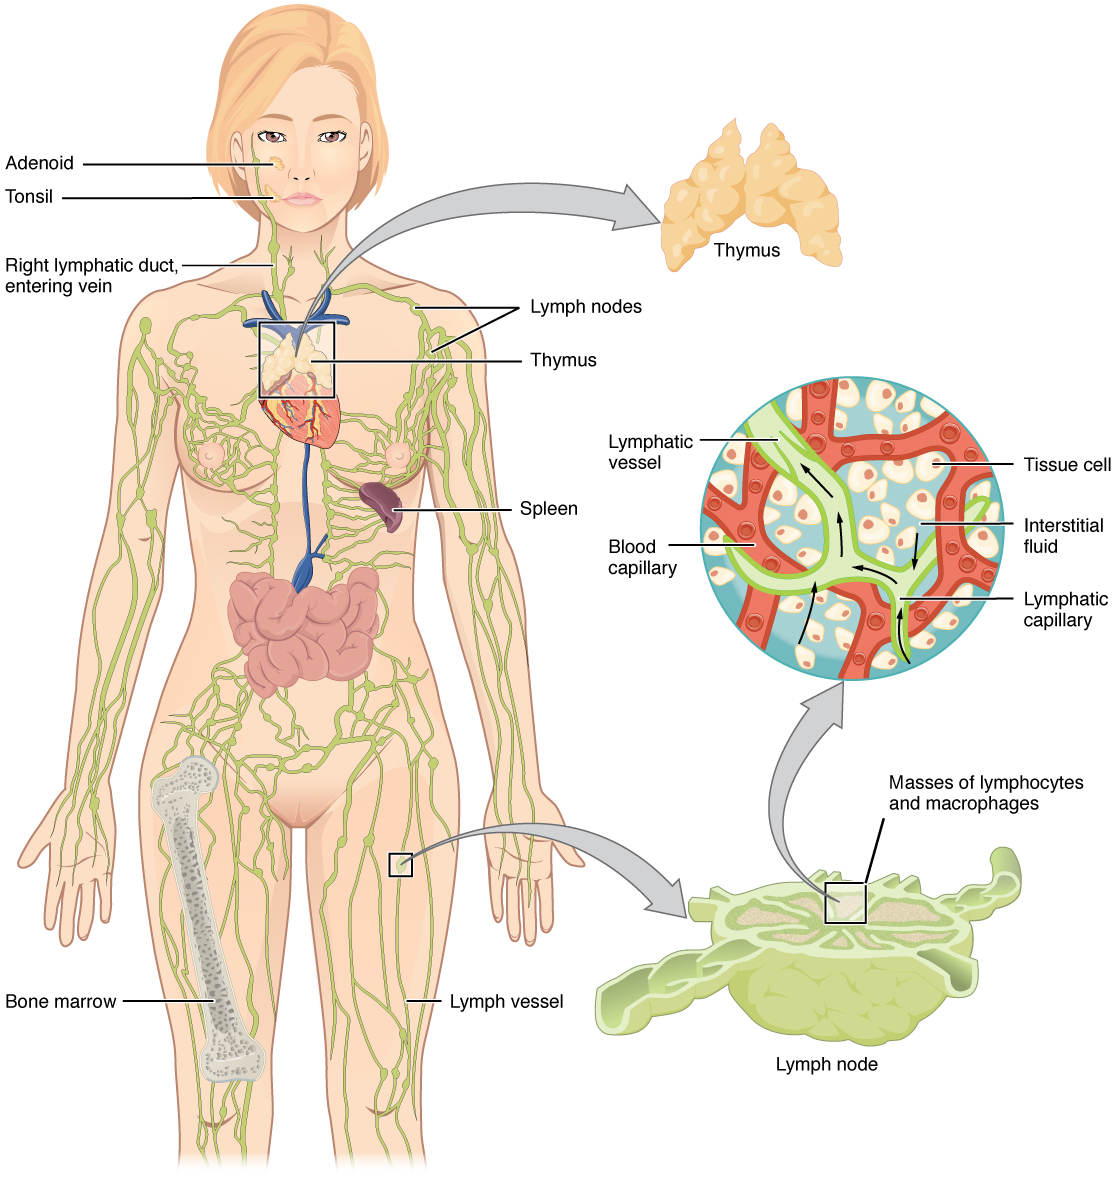 Organs of the lymphatic system